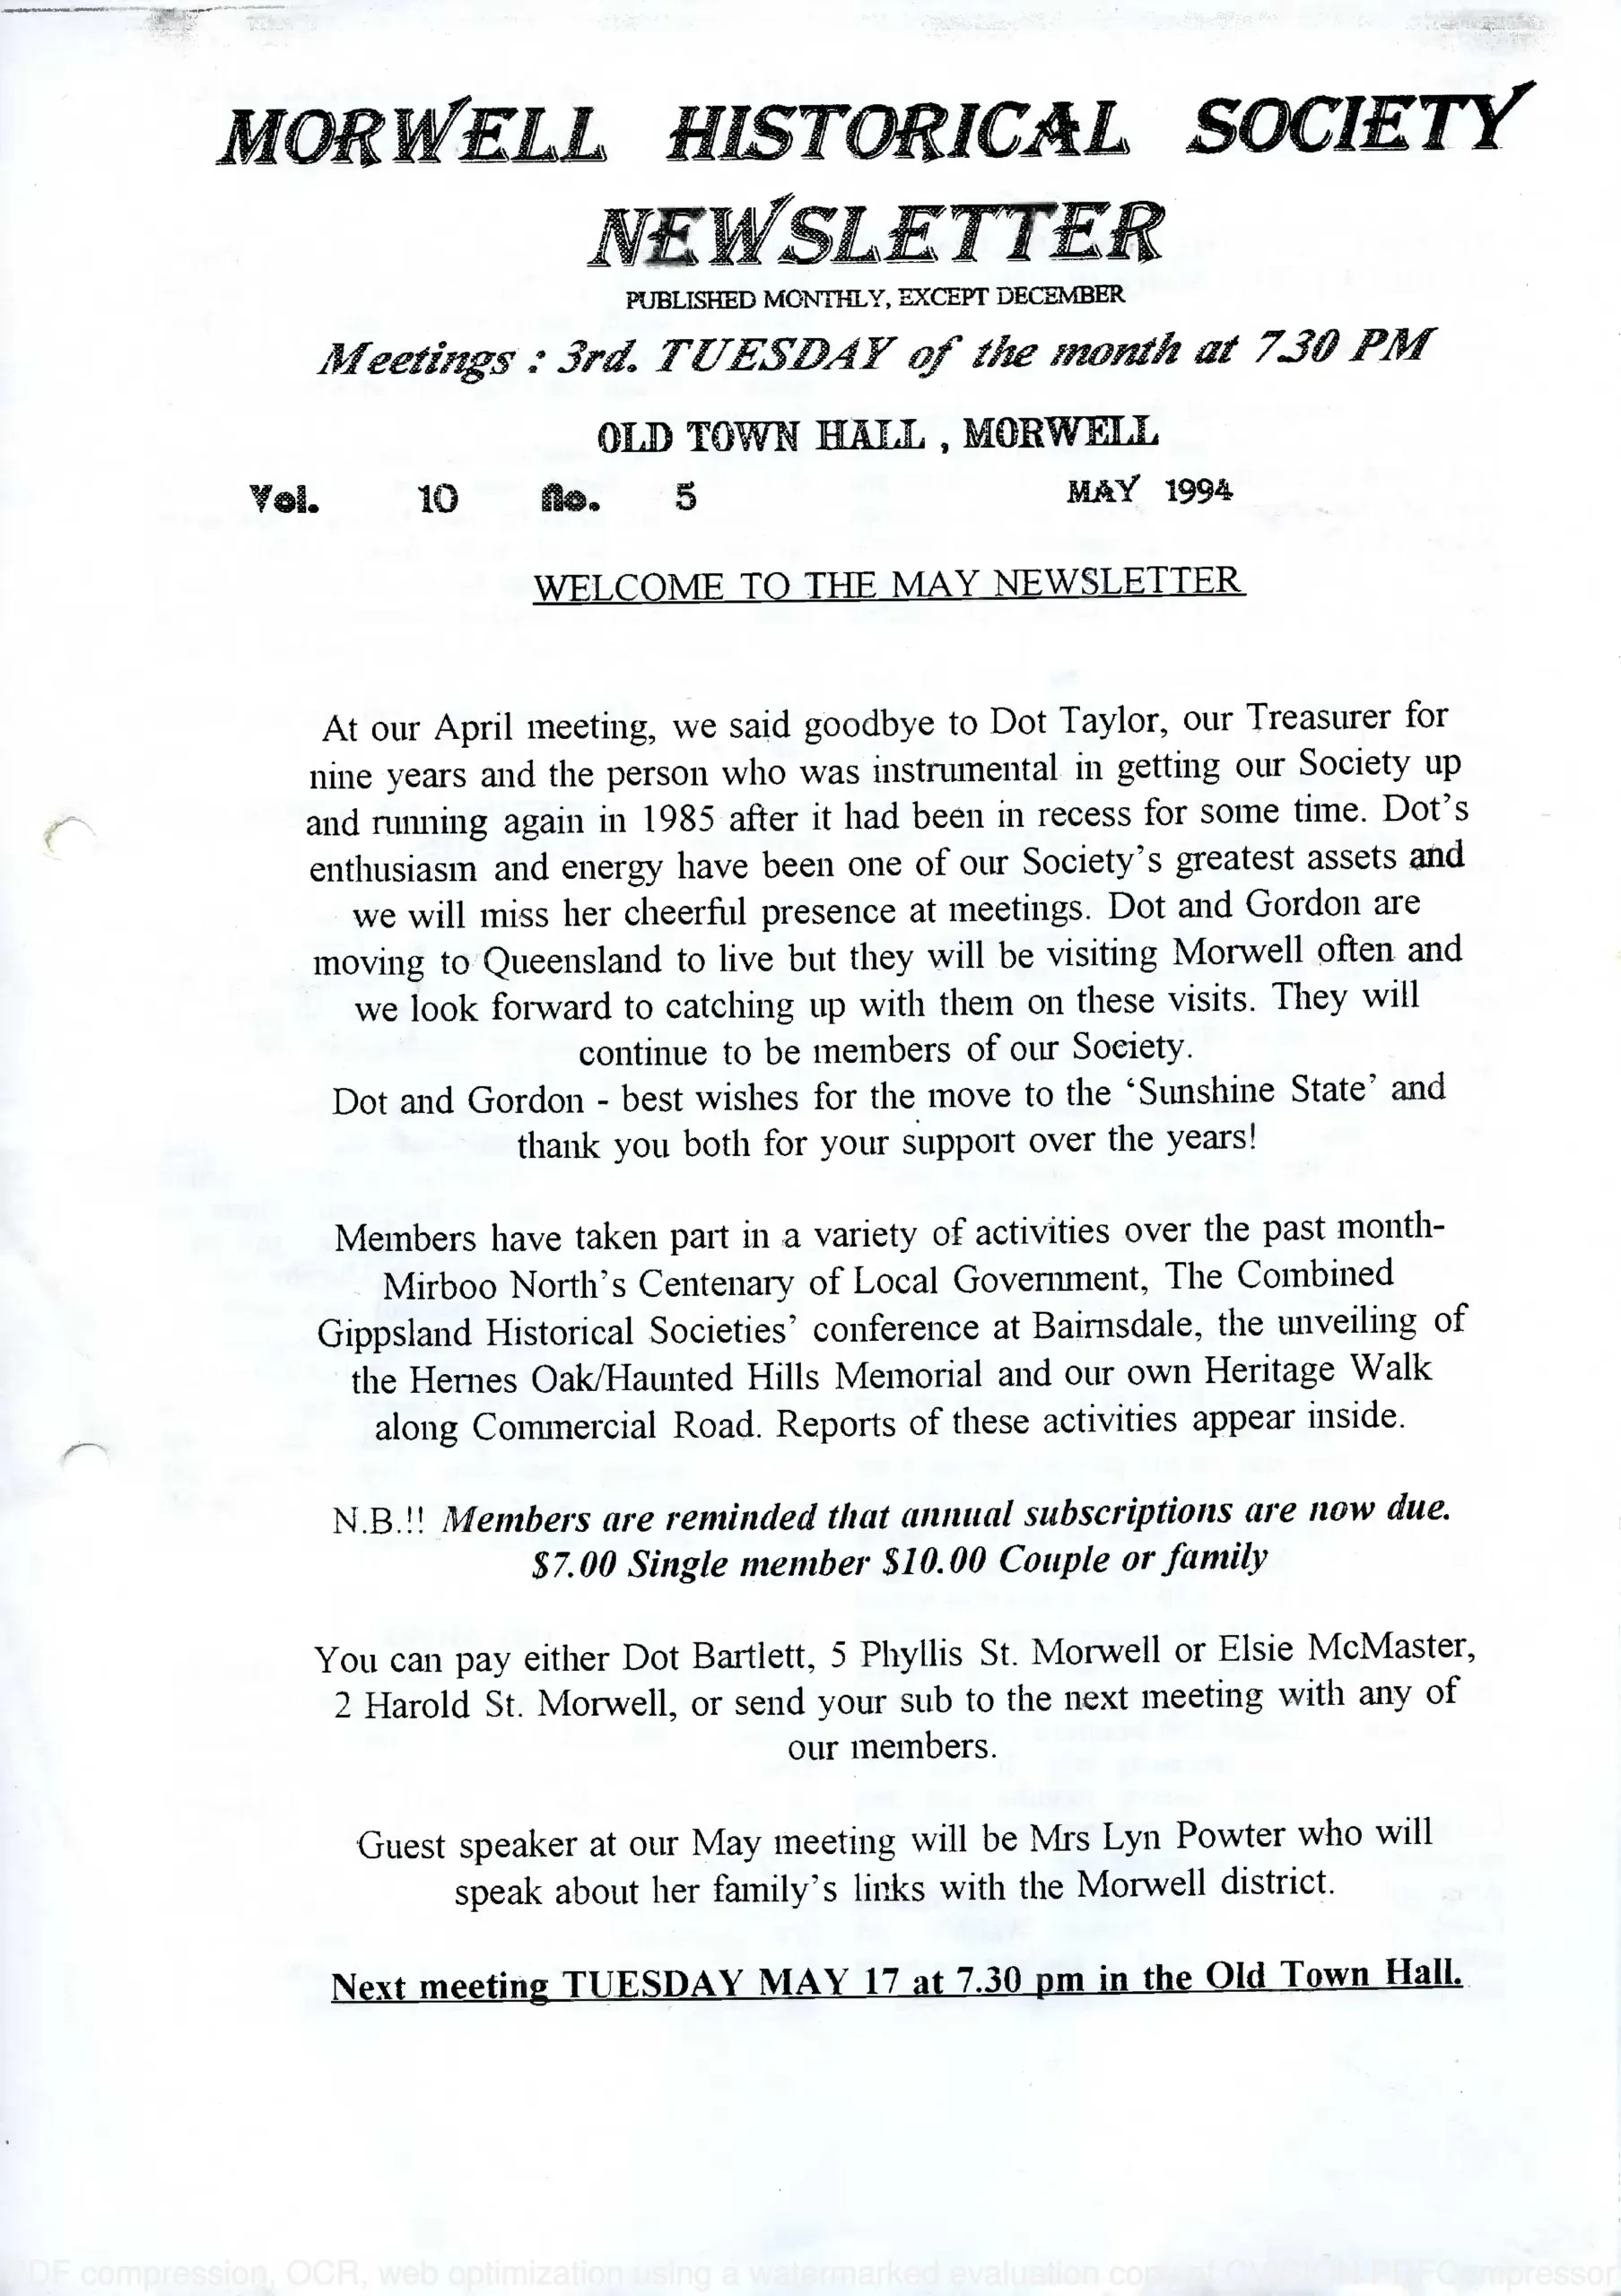 Newsletter May 1994